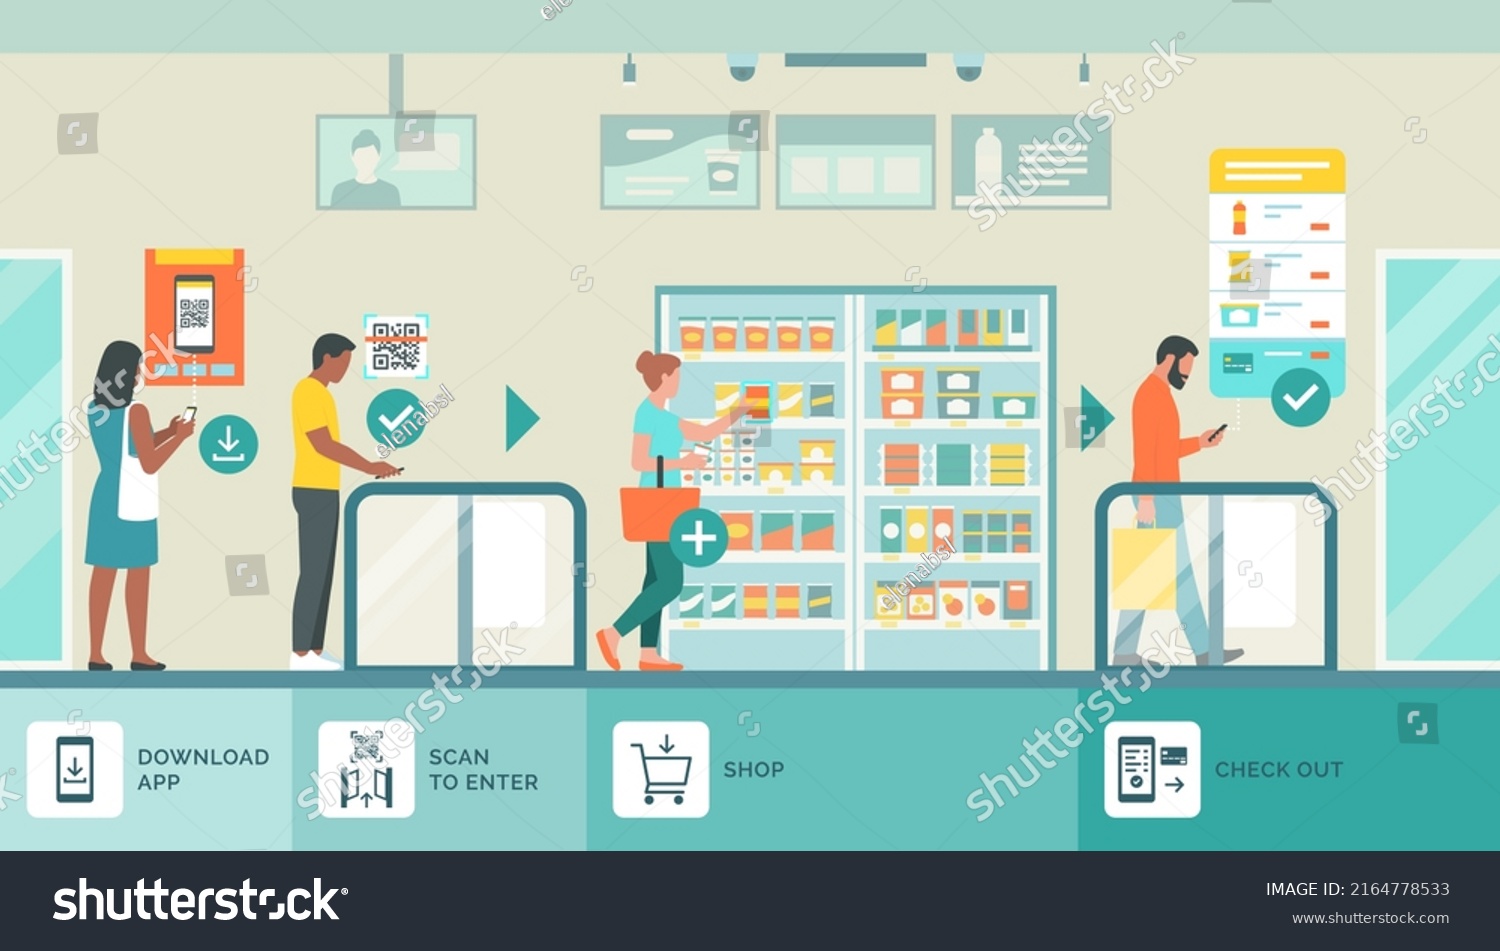 How to shop at the fully automated AI convenience store: people using the app to access the store and to purchase items checkout free #2164778533